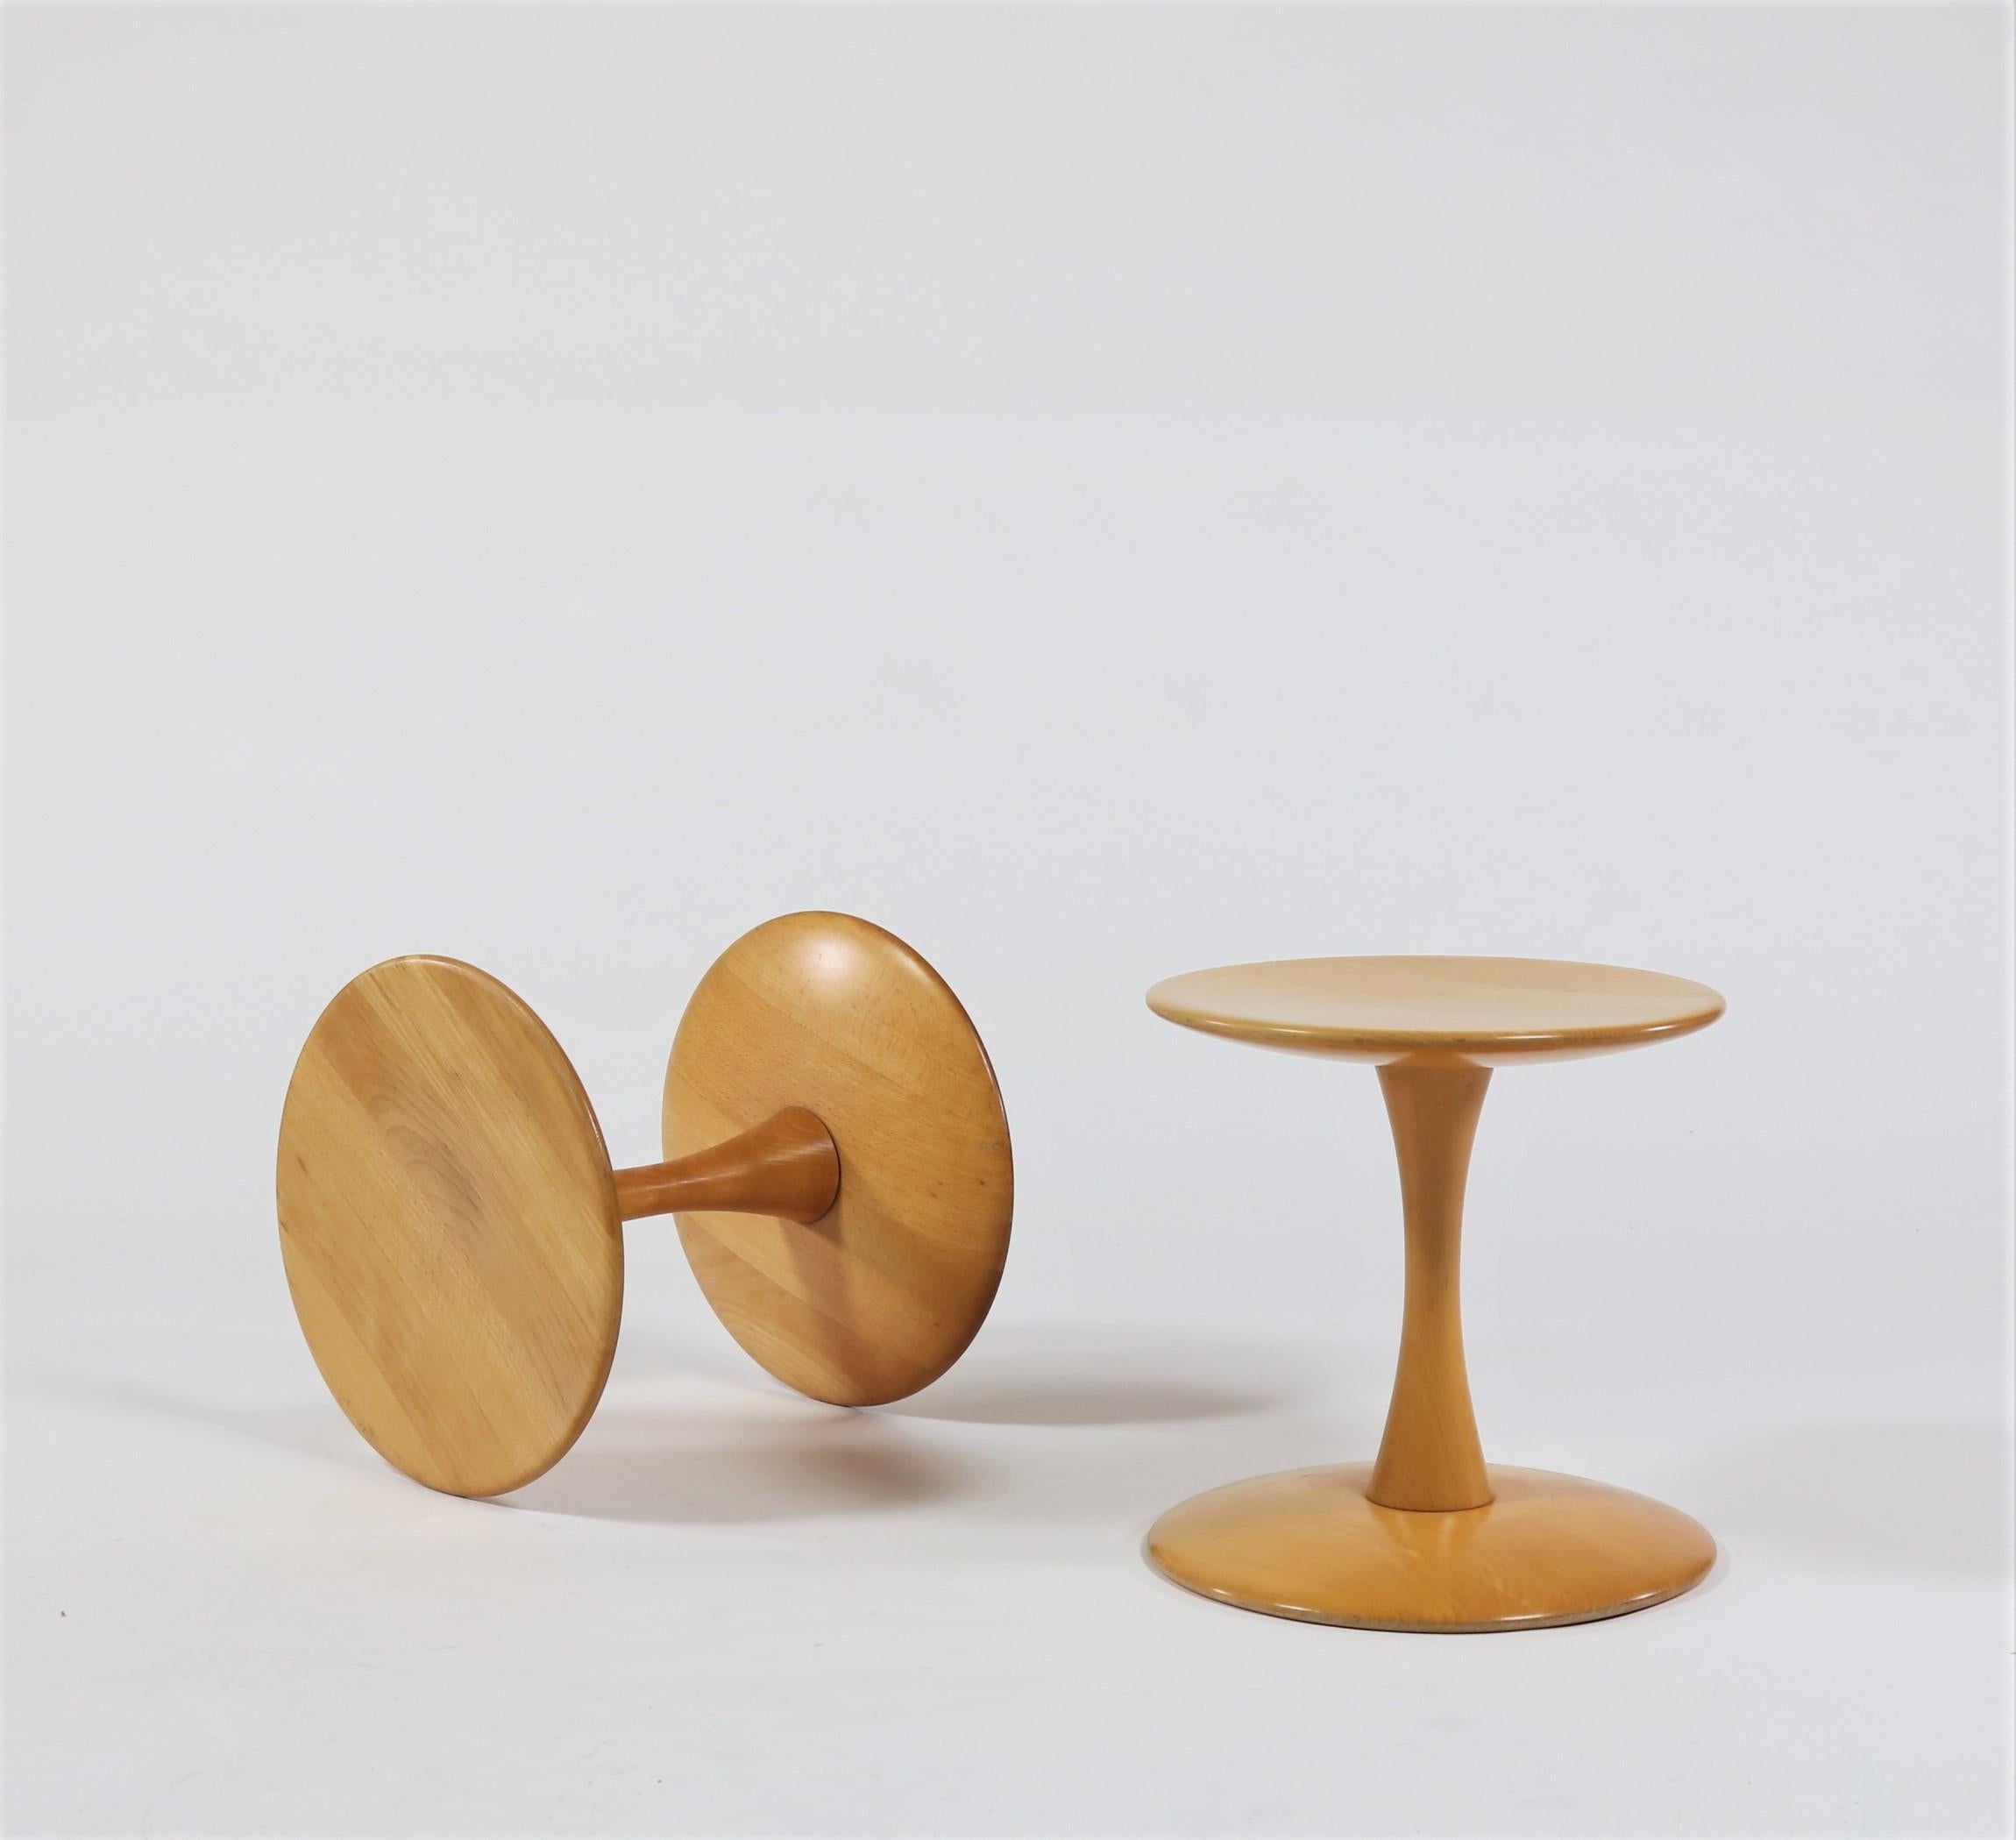 Brilliant and beautiful design by Nanna Ditzel for Kolds Savværk in 1962. This pair of stools in lacquered beech is from the early and original production of these iconic stools and has a beautiful patina to the wood.
The sculptural 